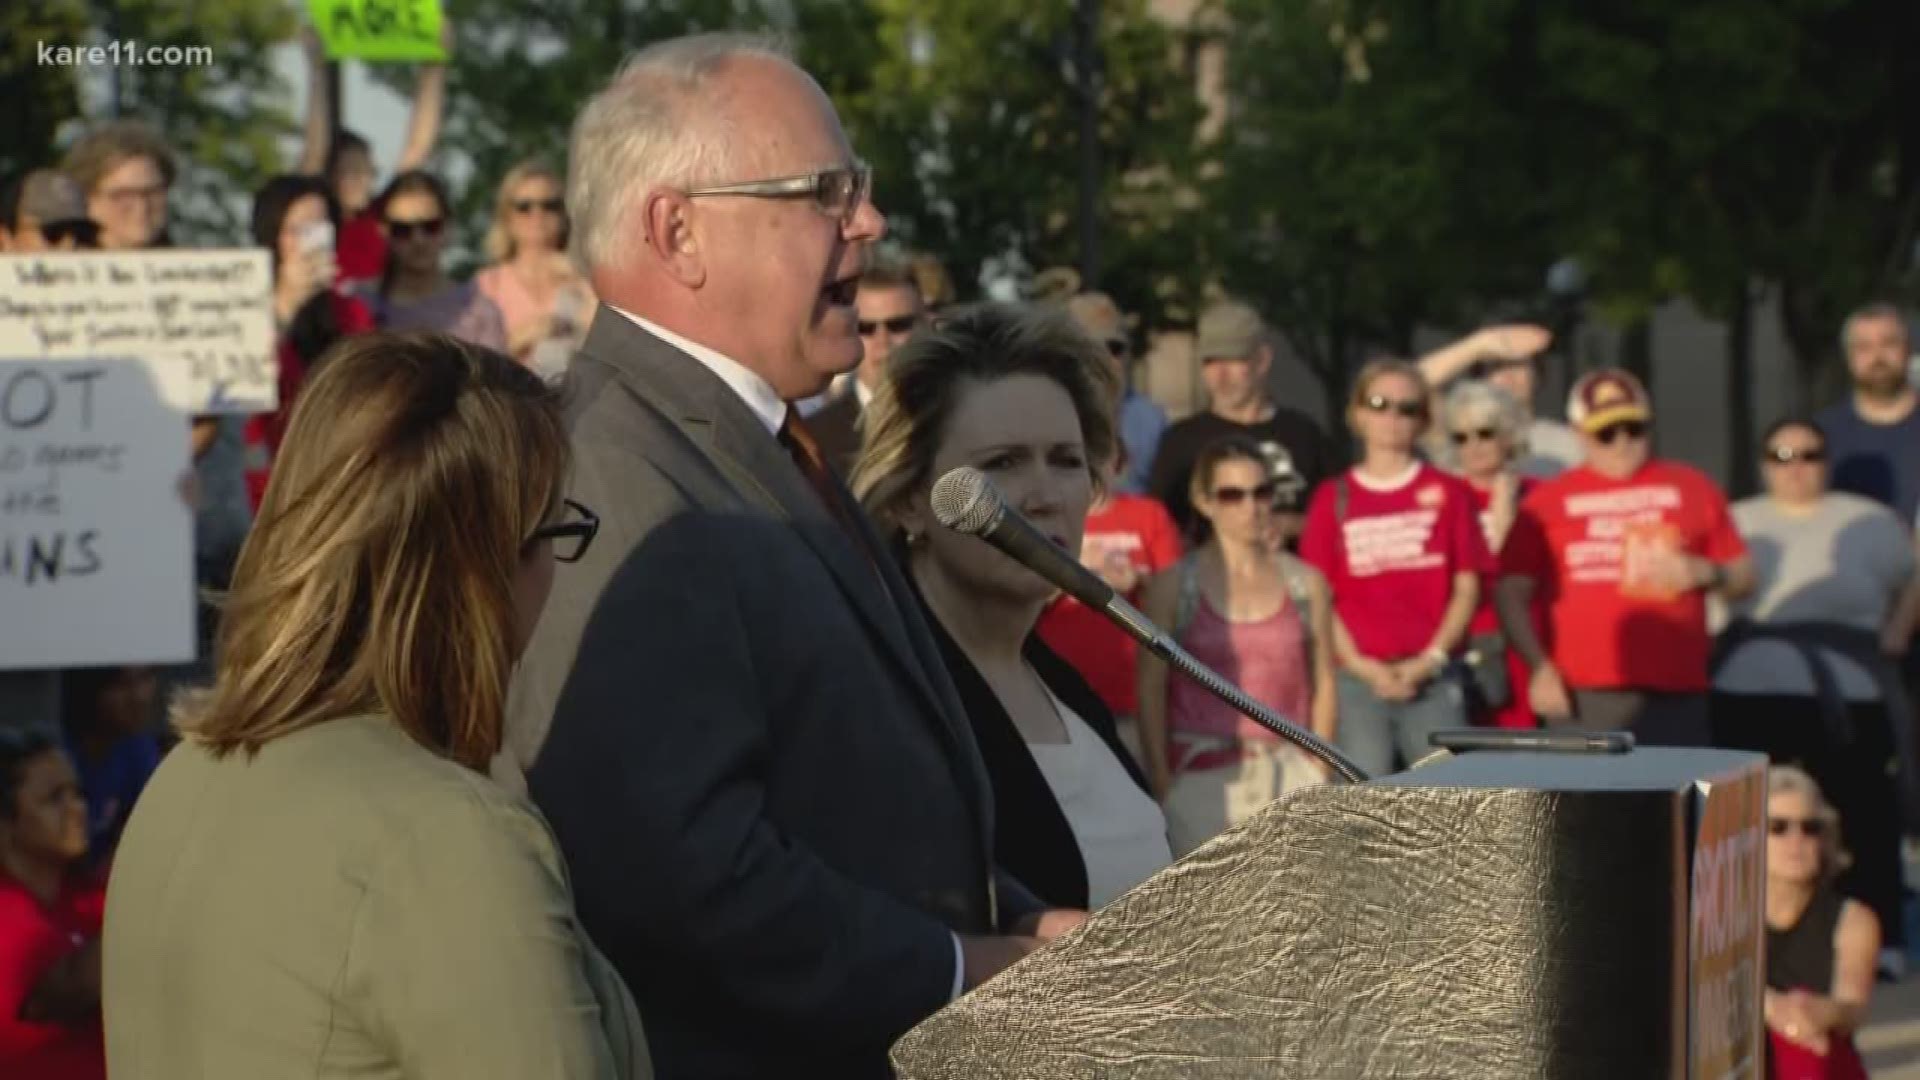 Gov. Tim Walz said he will consider calling a special session to address gun legislation, but only if Senate Republicans agree to hold a vote.